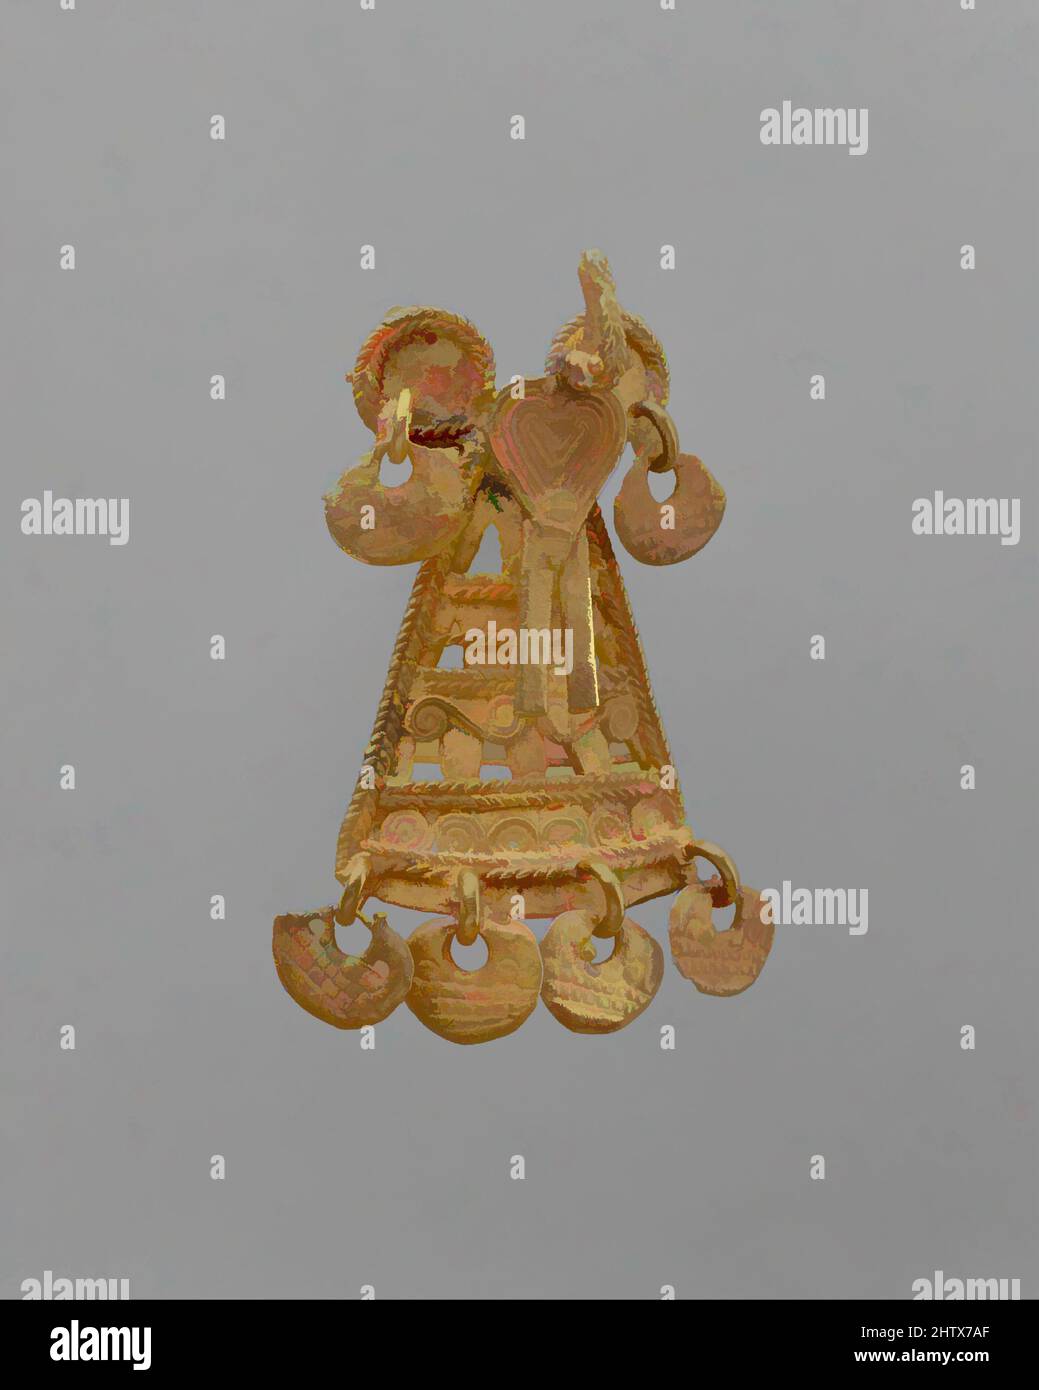 Art inspired by Bird Pendant, 10th–16th century, Colombia, Guatavita Lake region, Muisca, Gold (cast), H. 2 3/8 in. (6 cm), Metal-Ornaments, This pendant is an elegant example of the command of the goldsmith's art that existed for so many centuries in ancient Colombia. The Precolumbian, Classic works modernized by Artotop with a splash of modernity. Shapes, color and value, eye-catching visual impact on art. Emotions through freedom of artworks in a contemporary way. A timeless message pursuing a wildly creative new direction. Artists turning to the digital medium and creating the Artotop NFT Stock Photo